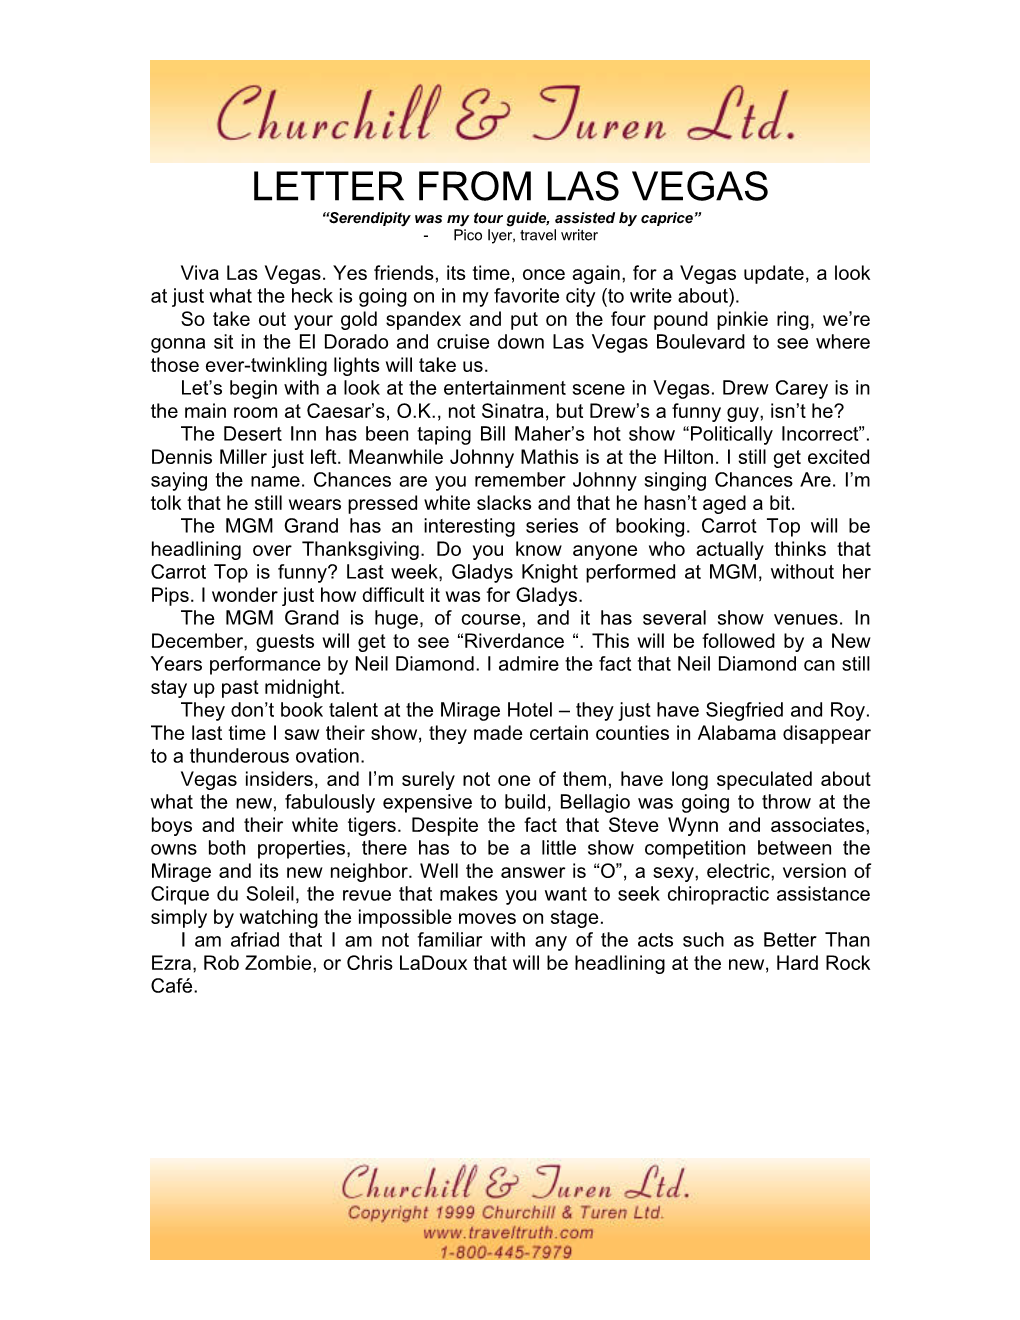 LETTER from LAS VEGAS “Serendipity Was My Tour Guide, Assisted by Caprice” - Pico Iyer, Travel Writer